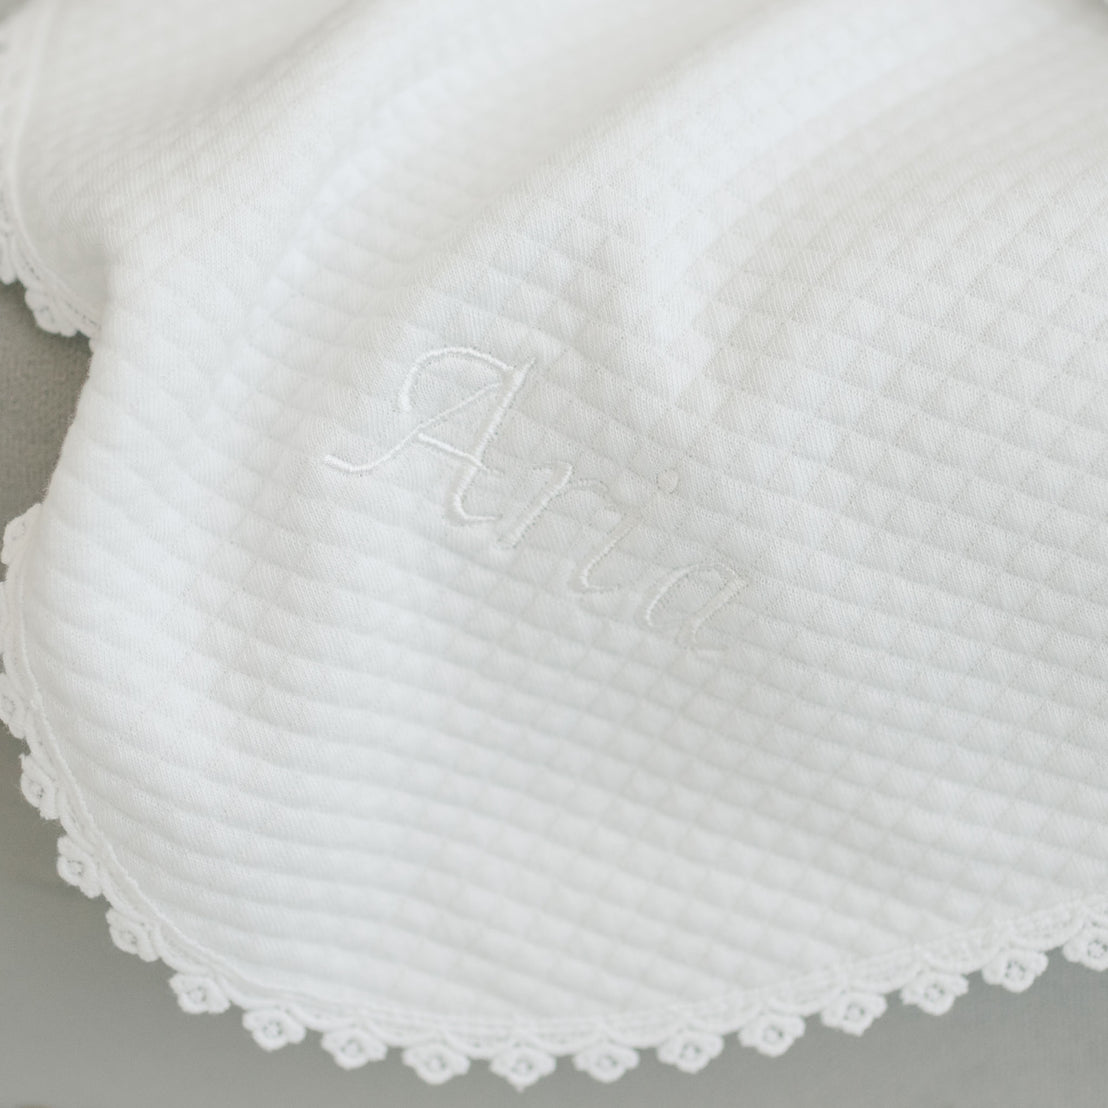 Close-up of a white textured cotton baby Aria Personalized Blanket with the name "Aria" embroidered in white thread, featuring a delicate lace trim.